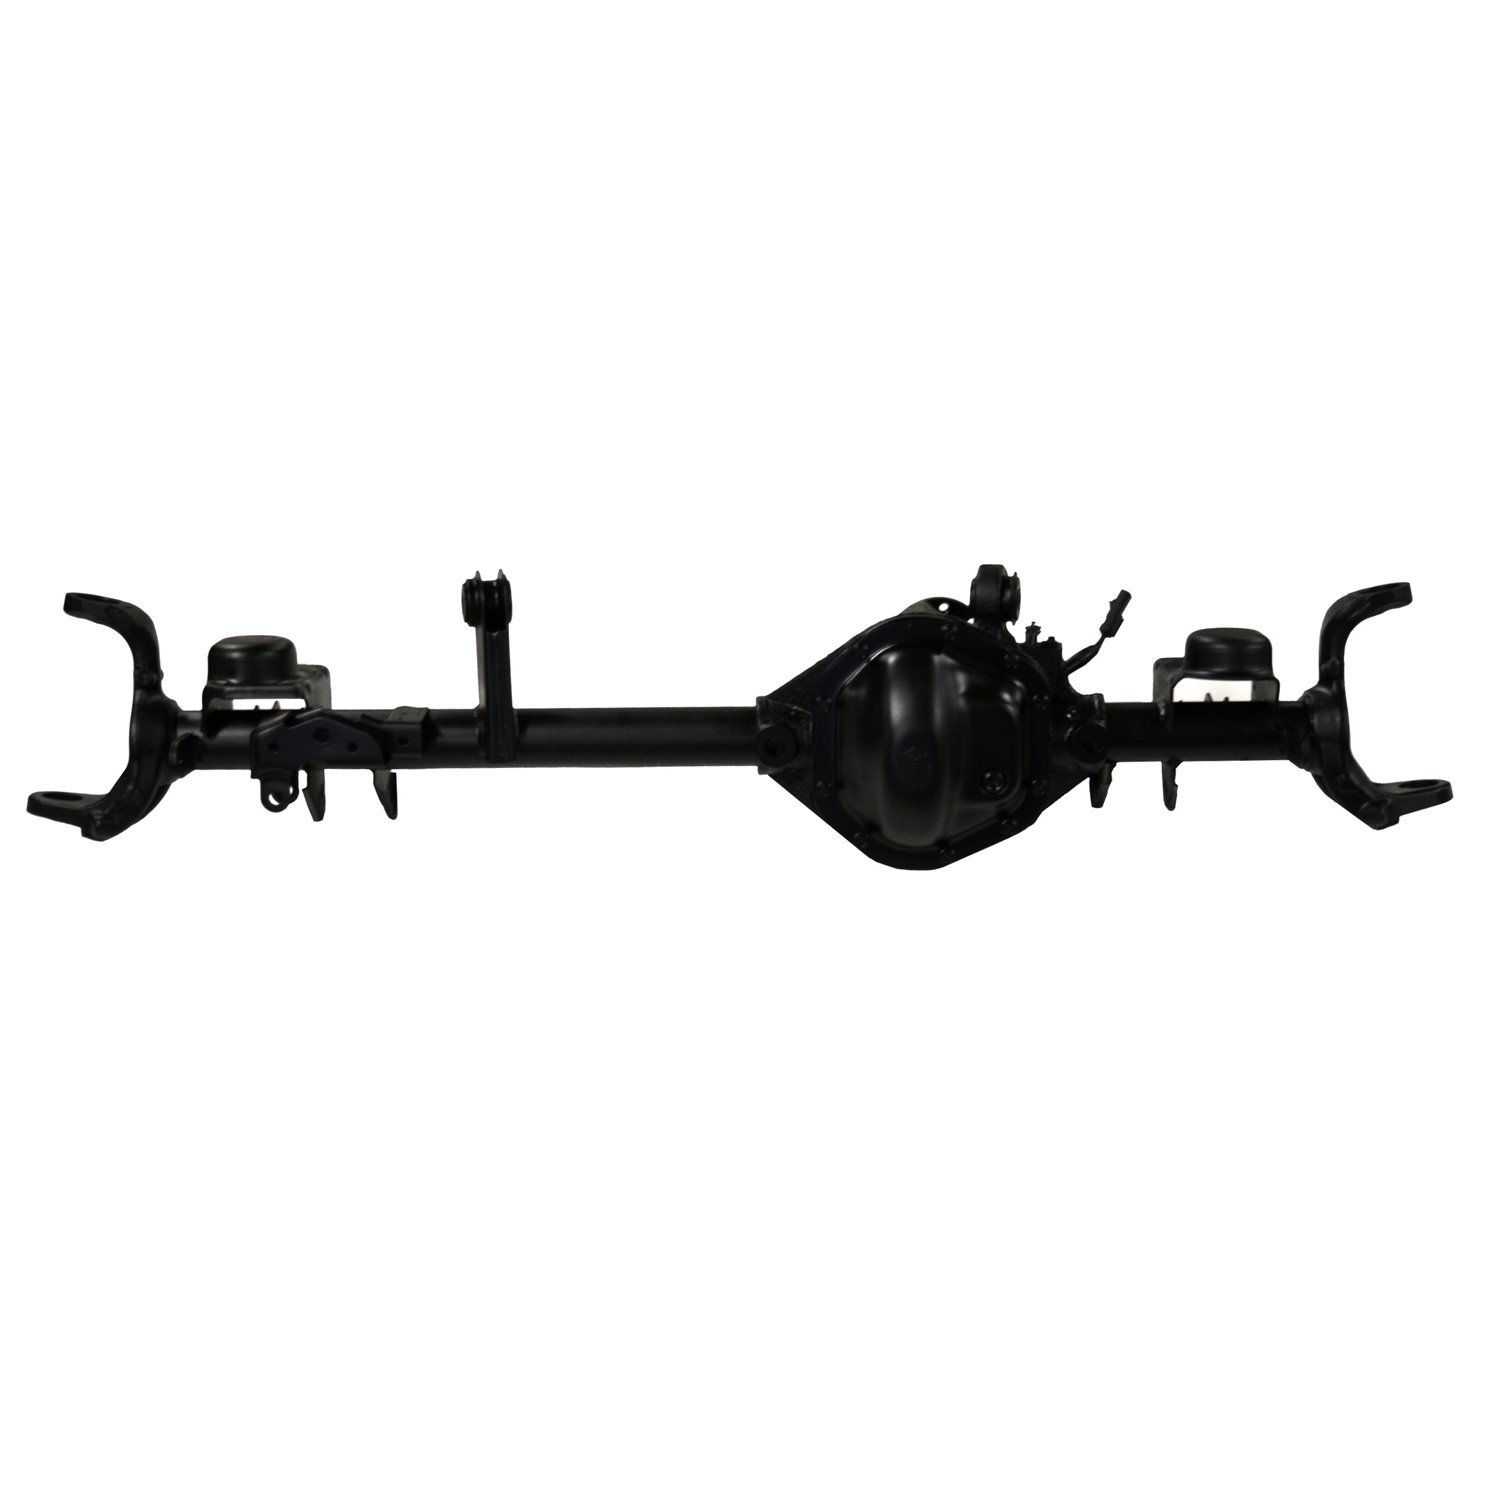 Remanufactured Complete Axle Assembly for Dana 44 11-14 Jeep Wrangler 3.21 Ratio